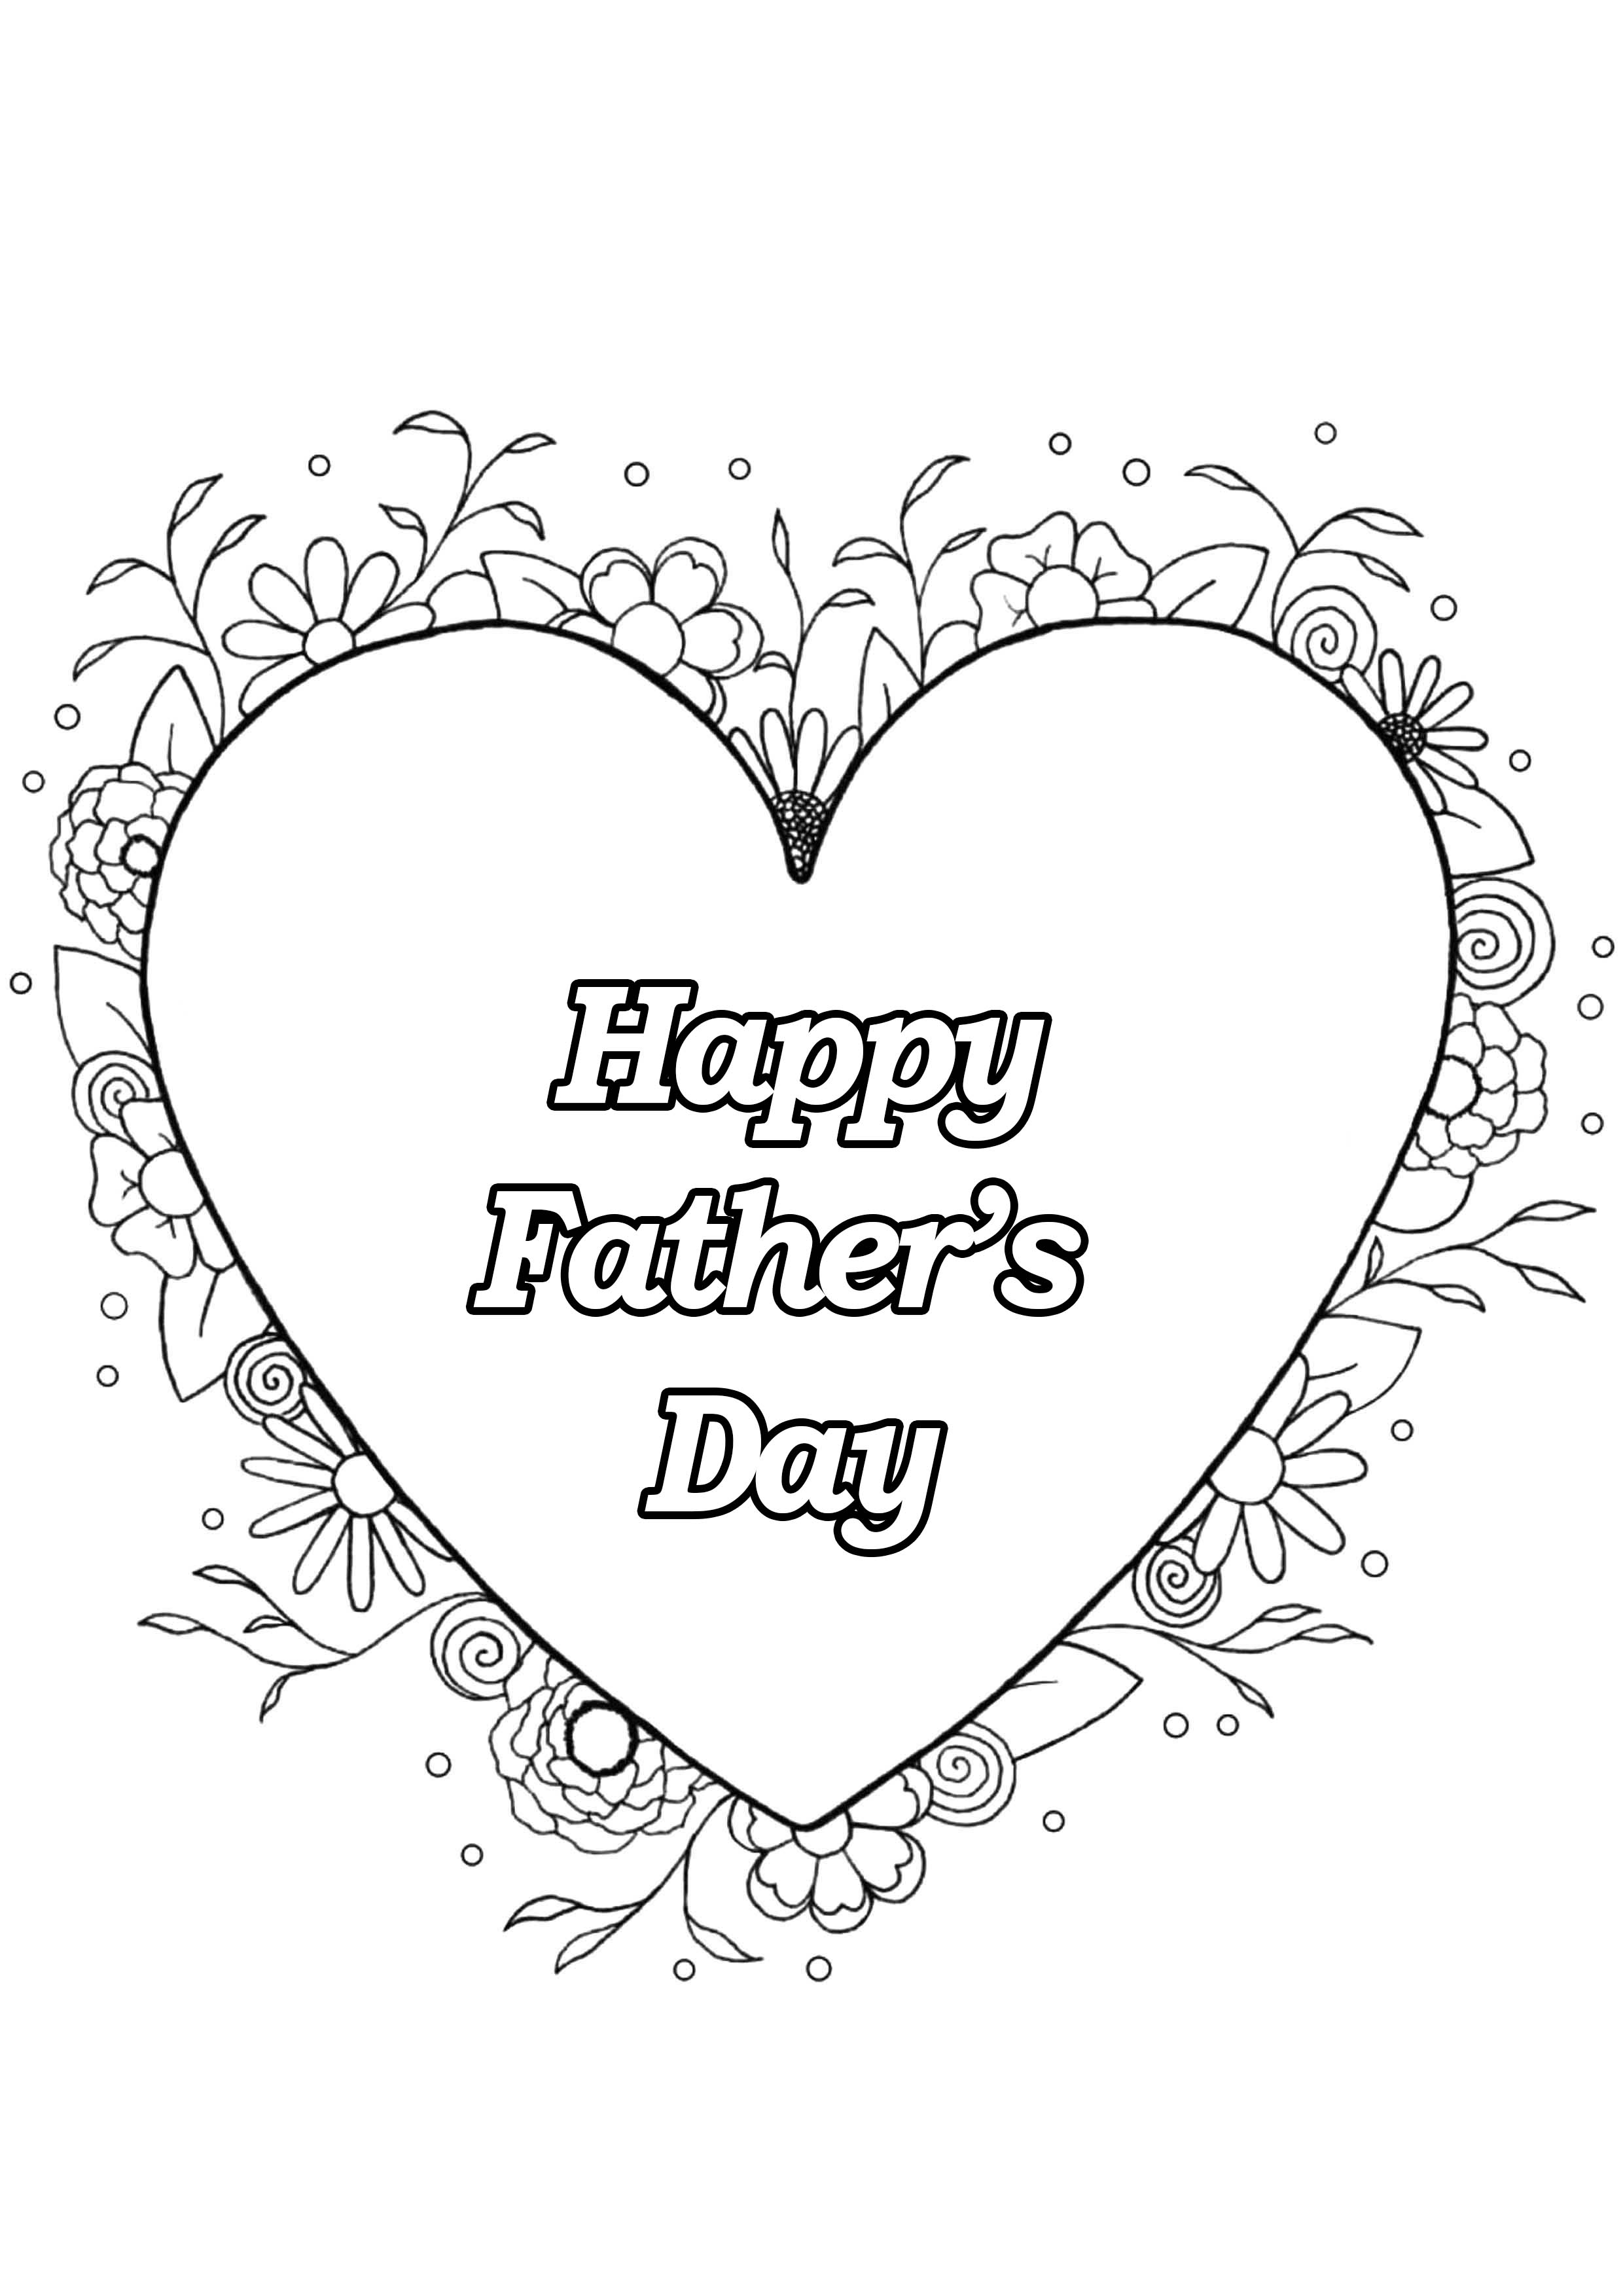 Father's day coloring page : Heart & Flowers